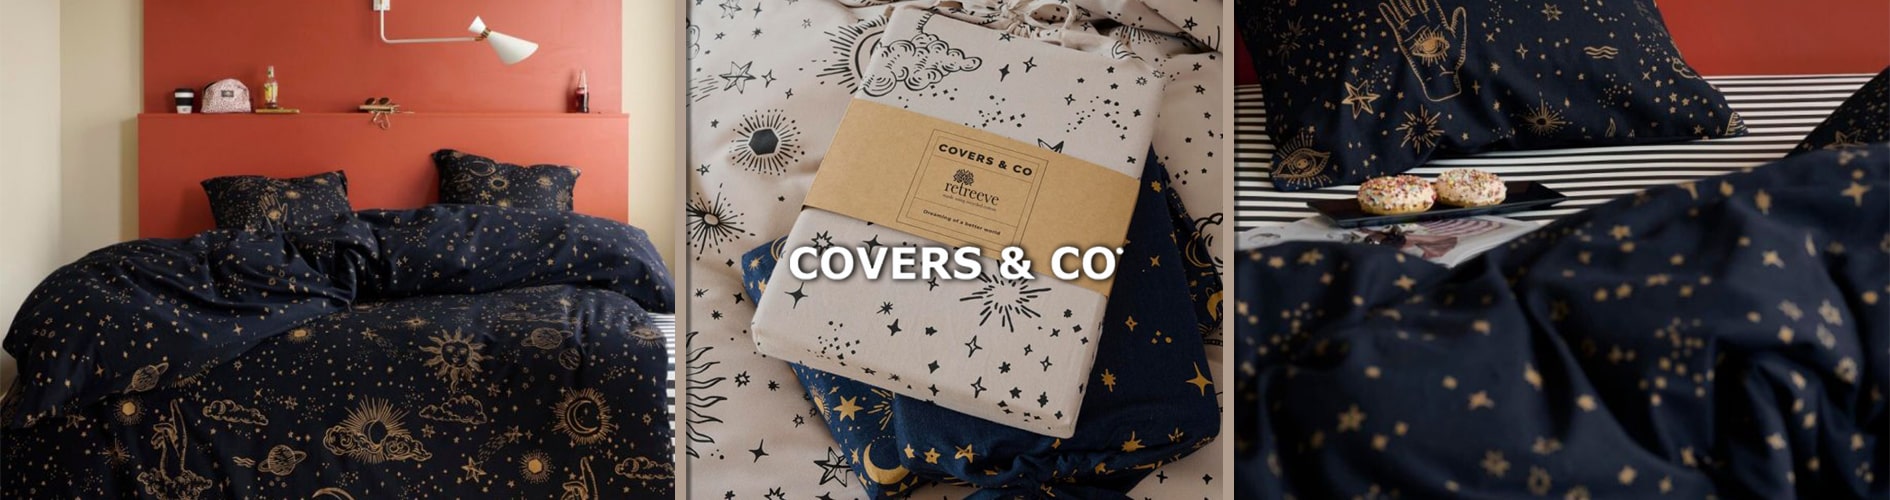 Covers & Co